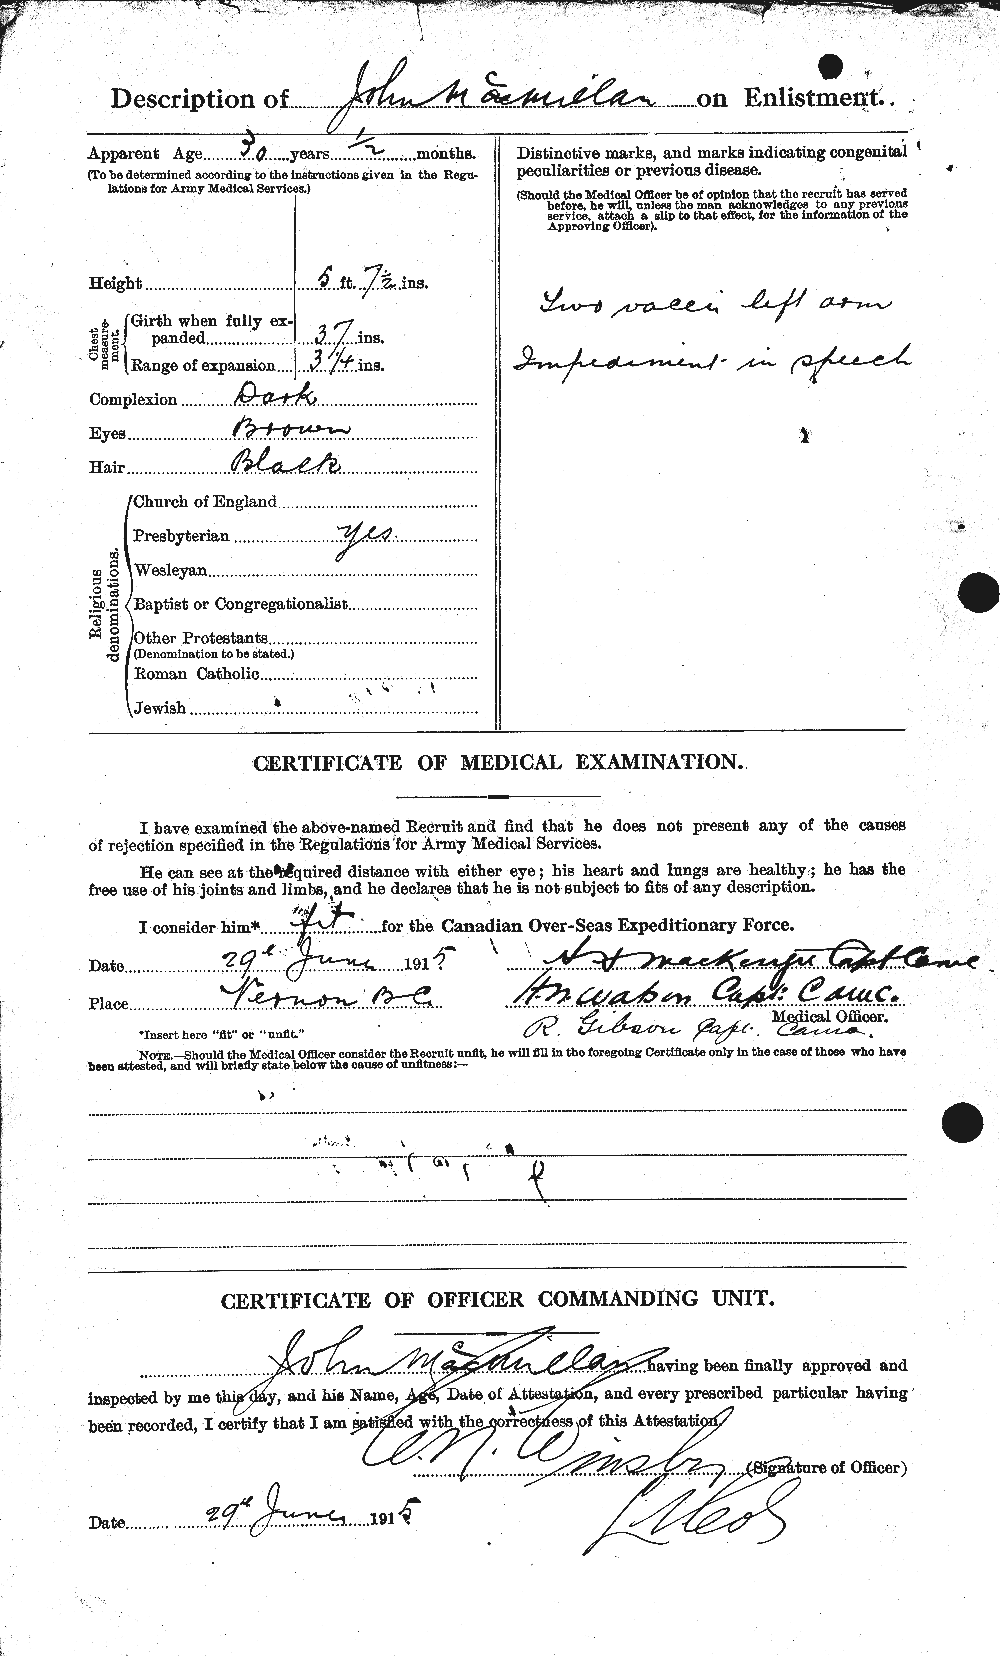 Personnel Records of the First World War - CEF 543971b